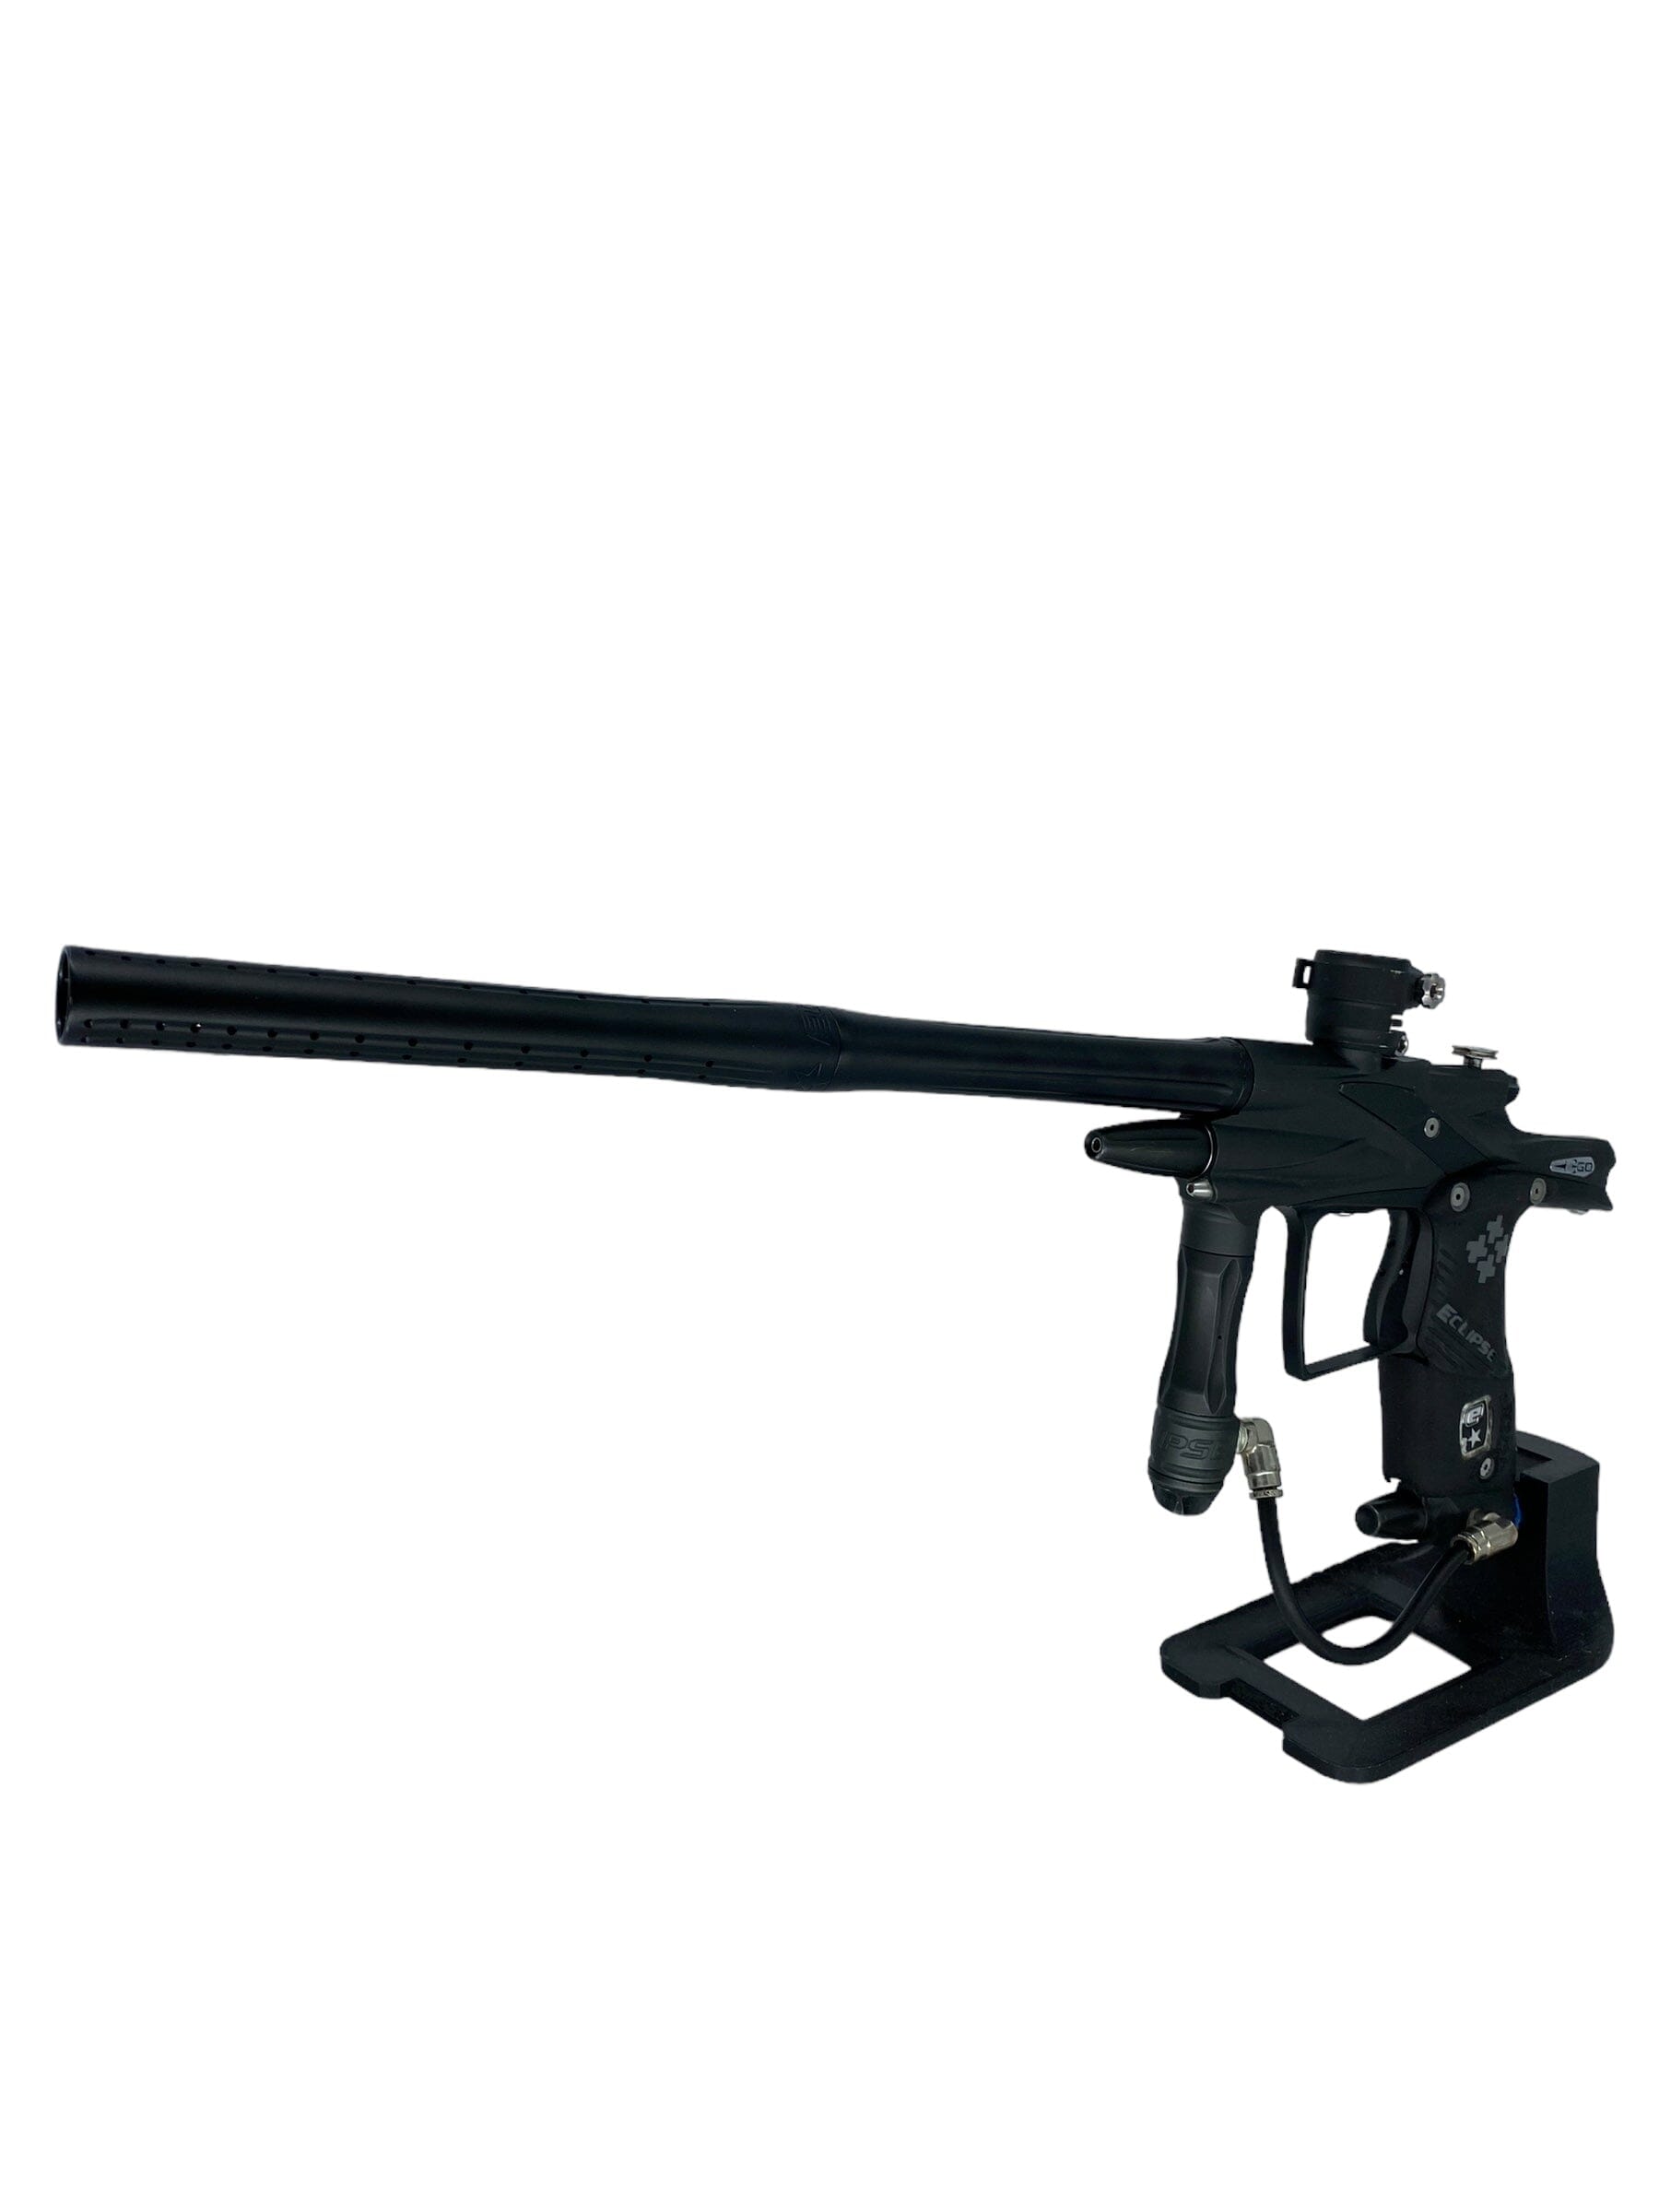 Used Planet Eclipse Ego 10 Paintball Gun Paintball Gun from CPXBrosPaintball Buy/Sell/Trade Paintball Markers, New Paintball Guns, Paintball Hoppers, Paintball Masks, and Hormesis Headbands